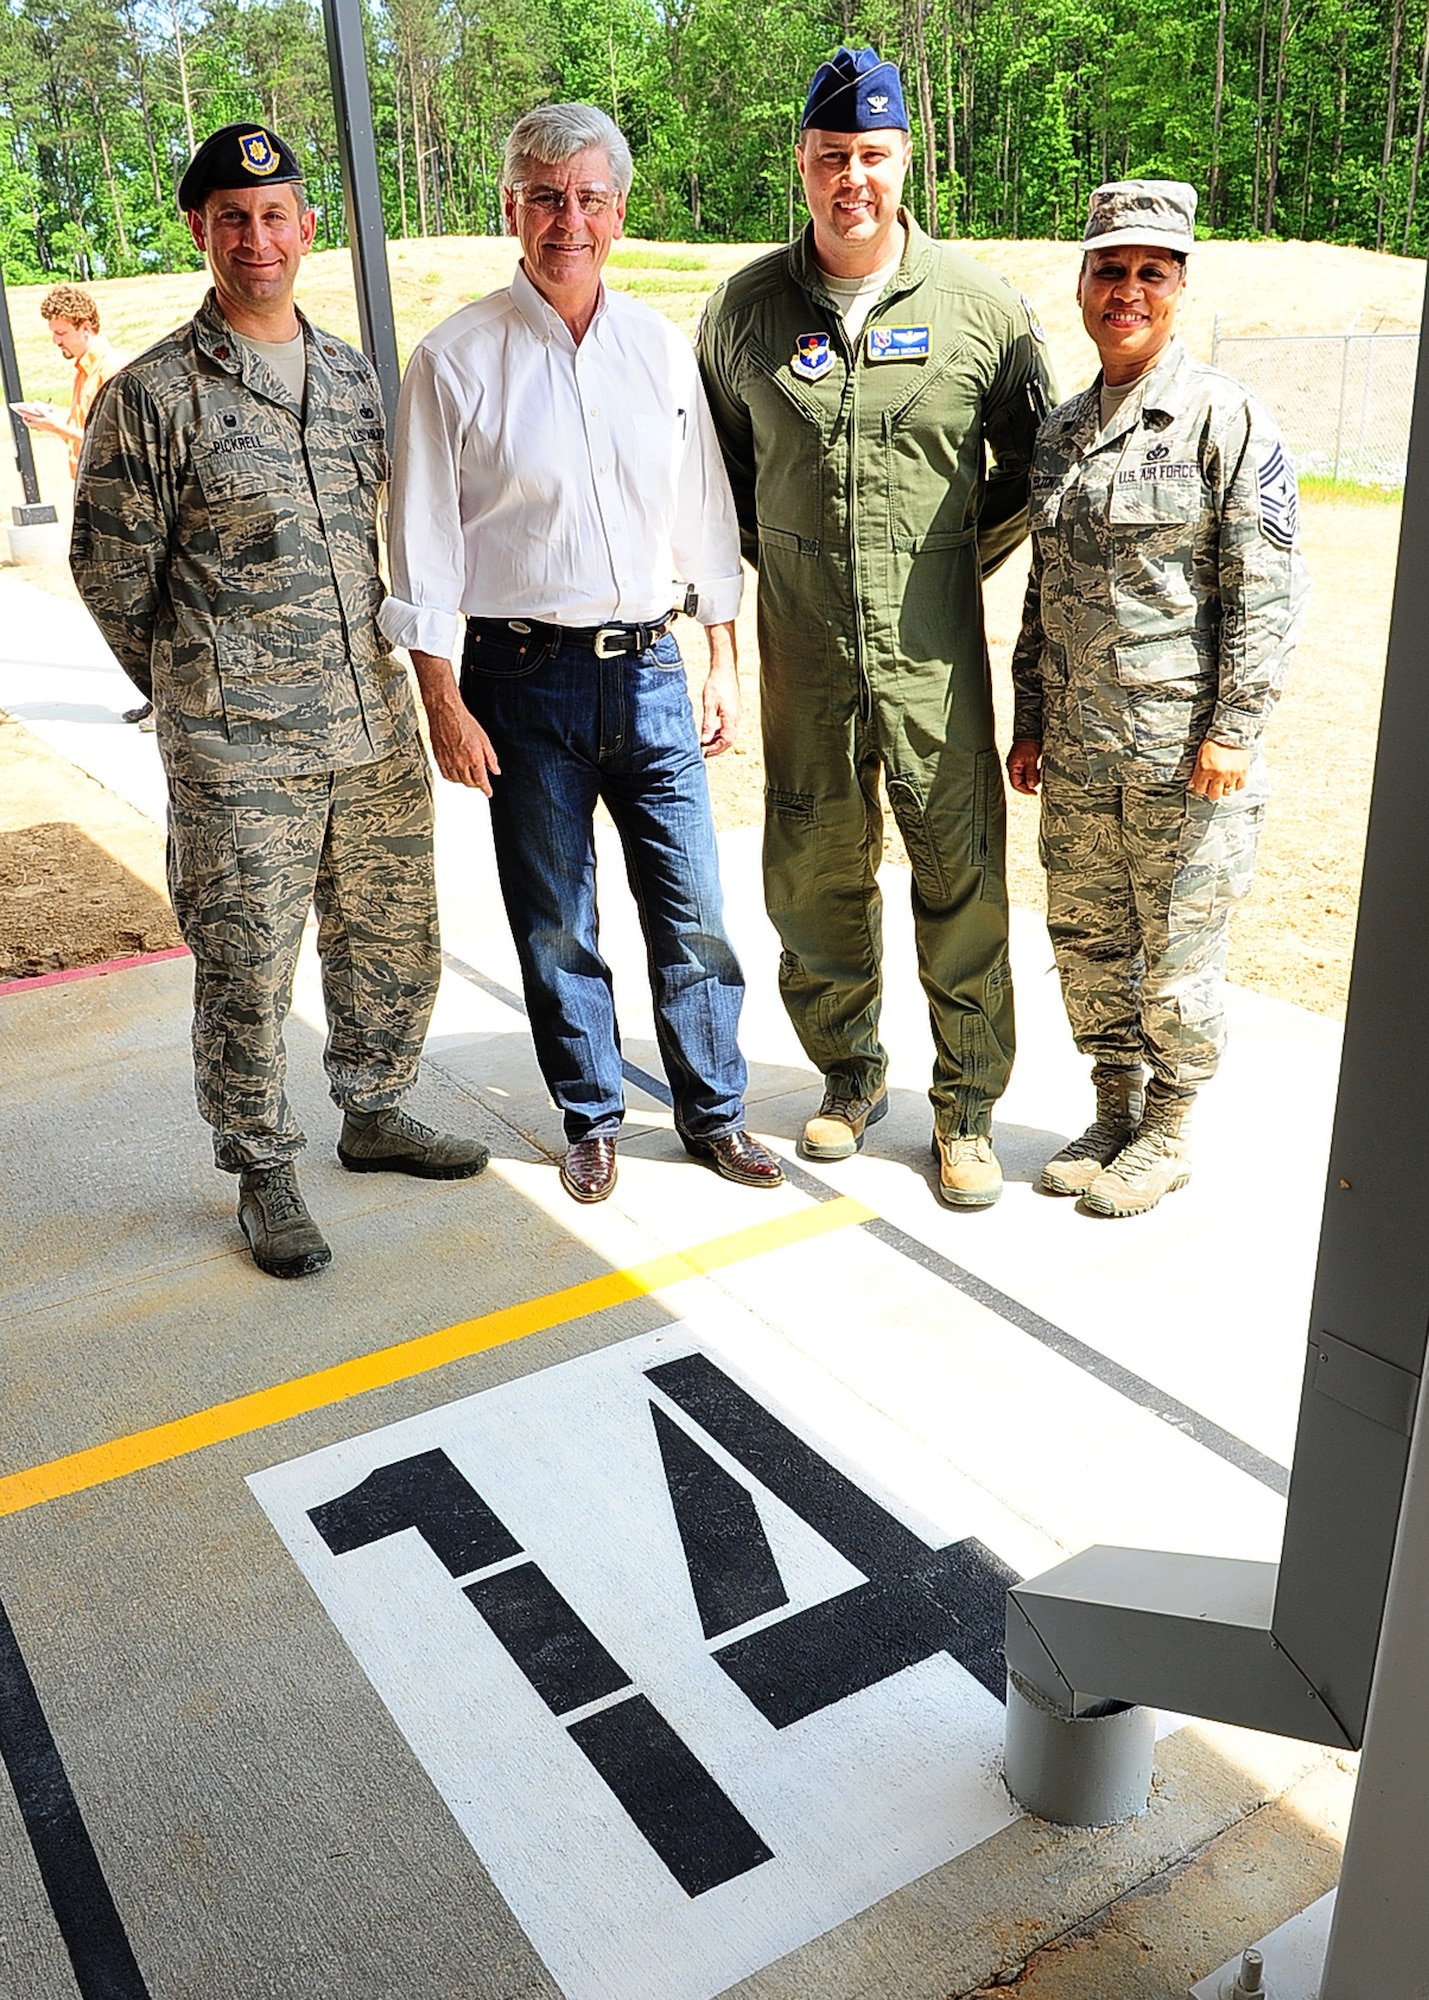 Maj. Brenton Pickrell, 14th Security Forces Squadron Commander, Mississippi Governor Phil Bryant, Col. John Nichols, 14th Flying Training Wing Commander, and Chief Master Sgt. Rita Felton, 14th FTW Command Chief, gather for a photo at Lane 14 of the new Columbus Lowndes County Small Arms Range May 8 in Lowndes County, Mississippi. The range will be used jointly by Columbus Air Force Base Airmen, Lowndes County, city of Columbus and other local law enforcement departments for weapons qualification and training. (U.S. Air Force photo by Airman Daniel Lile)